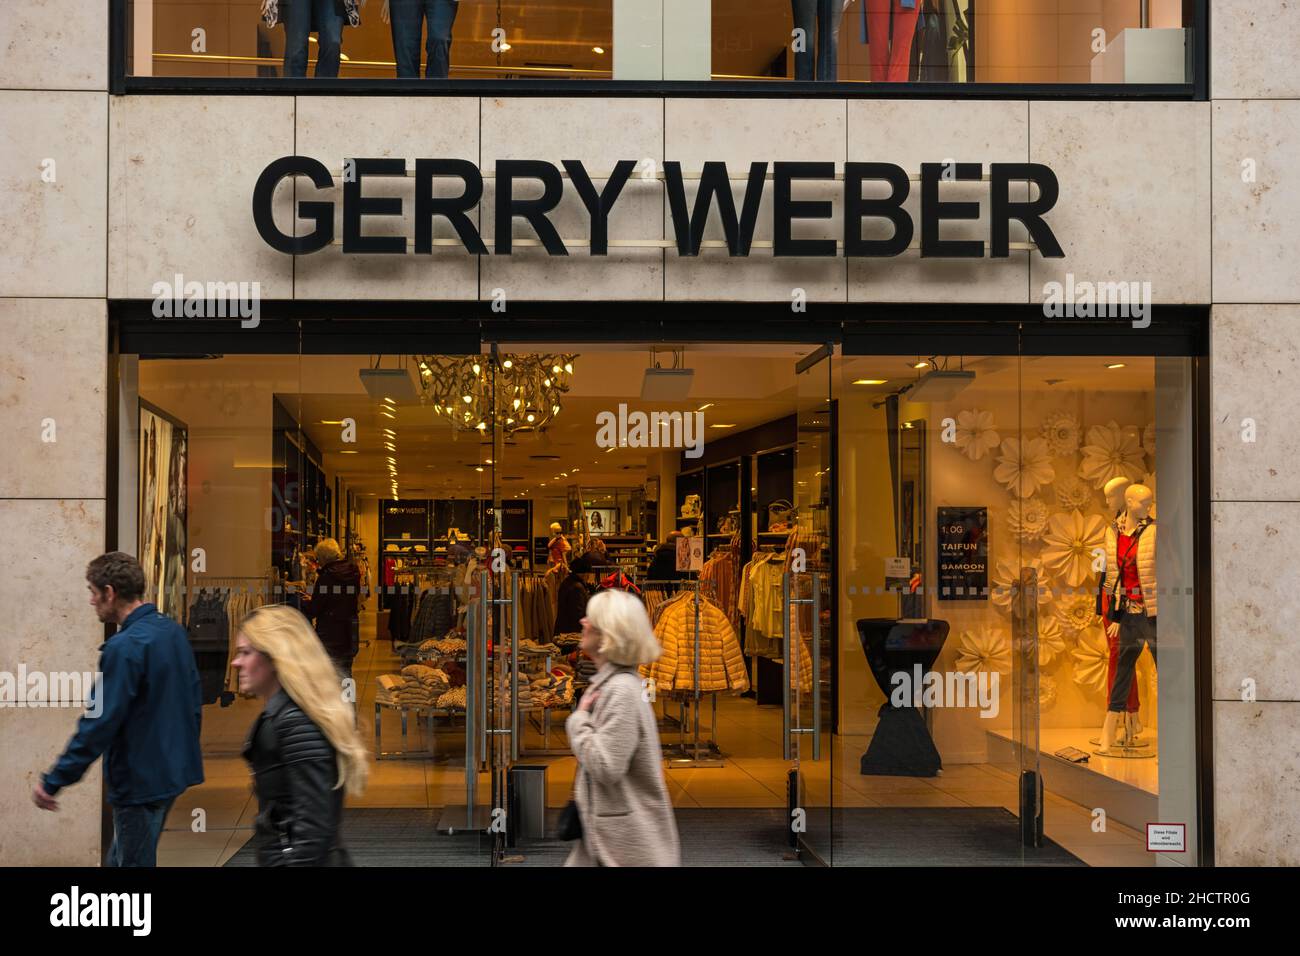 Store of the company "Gerry Weber", Gerry Weber 1,000 own stores with brands Taifun, and Hallhuber Stock Photo -